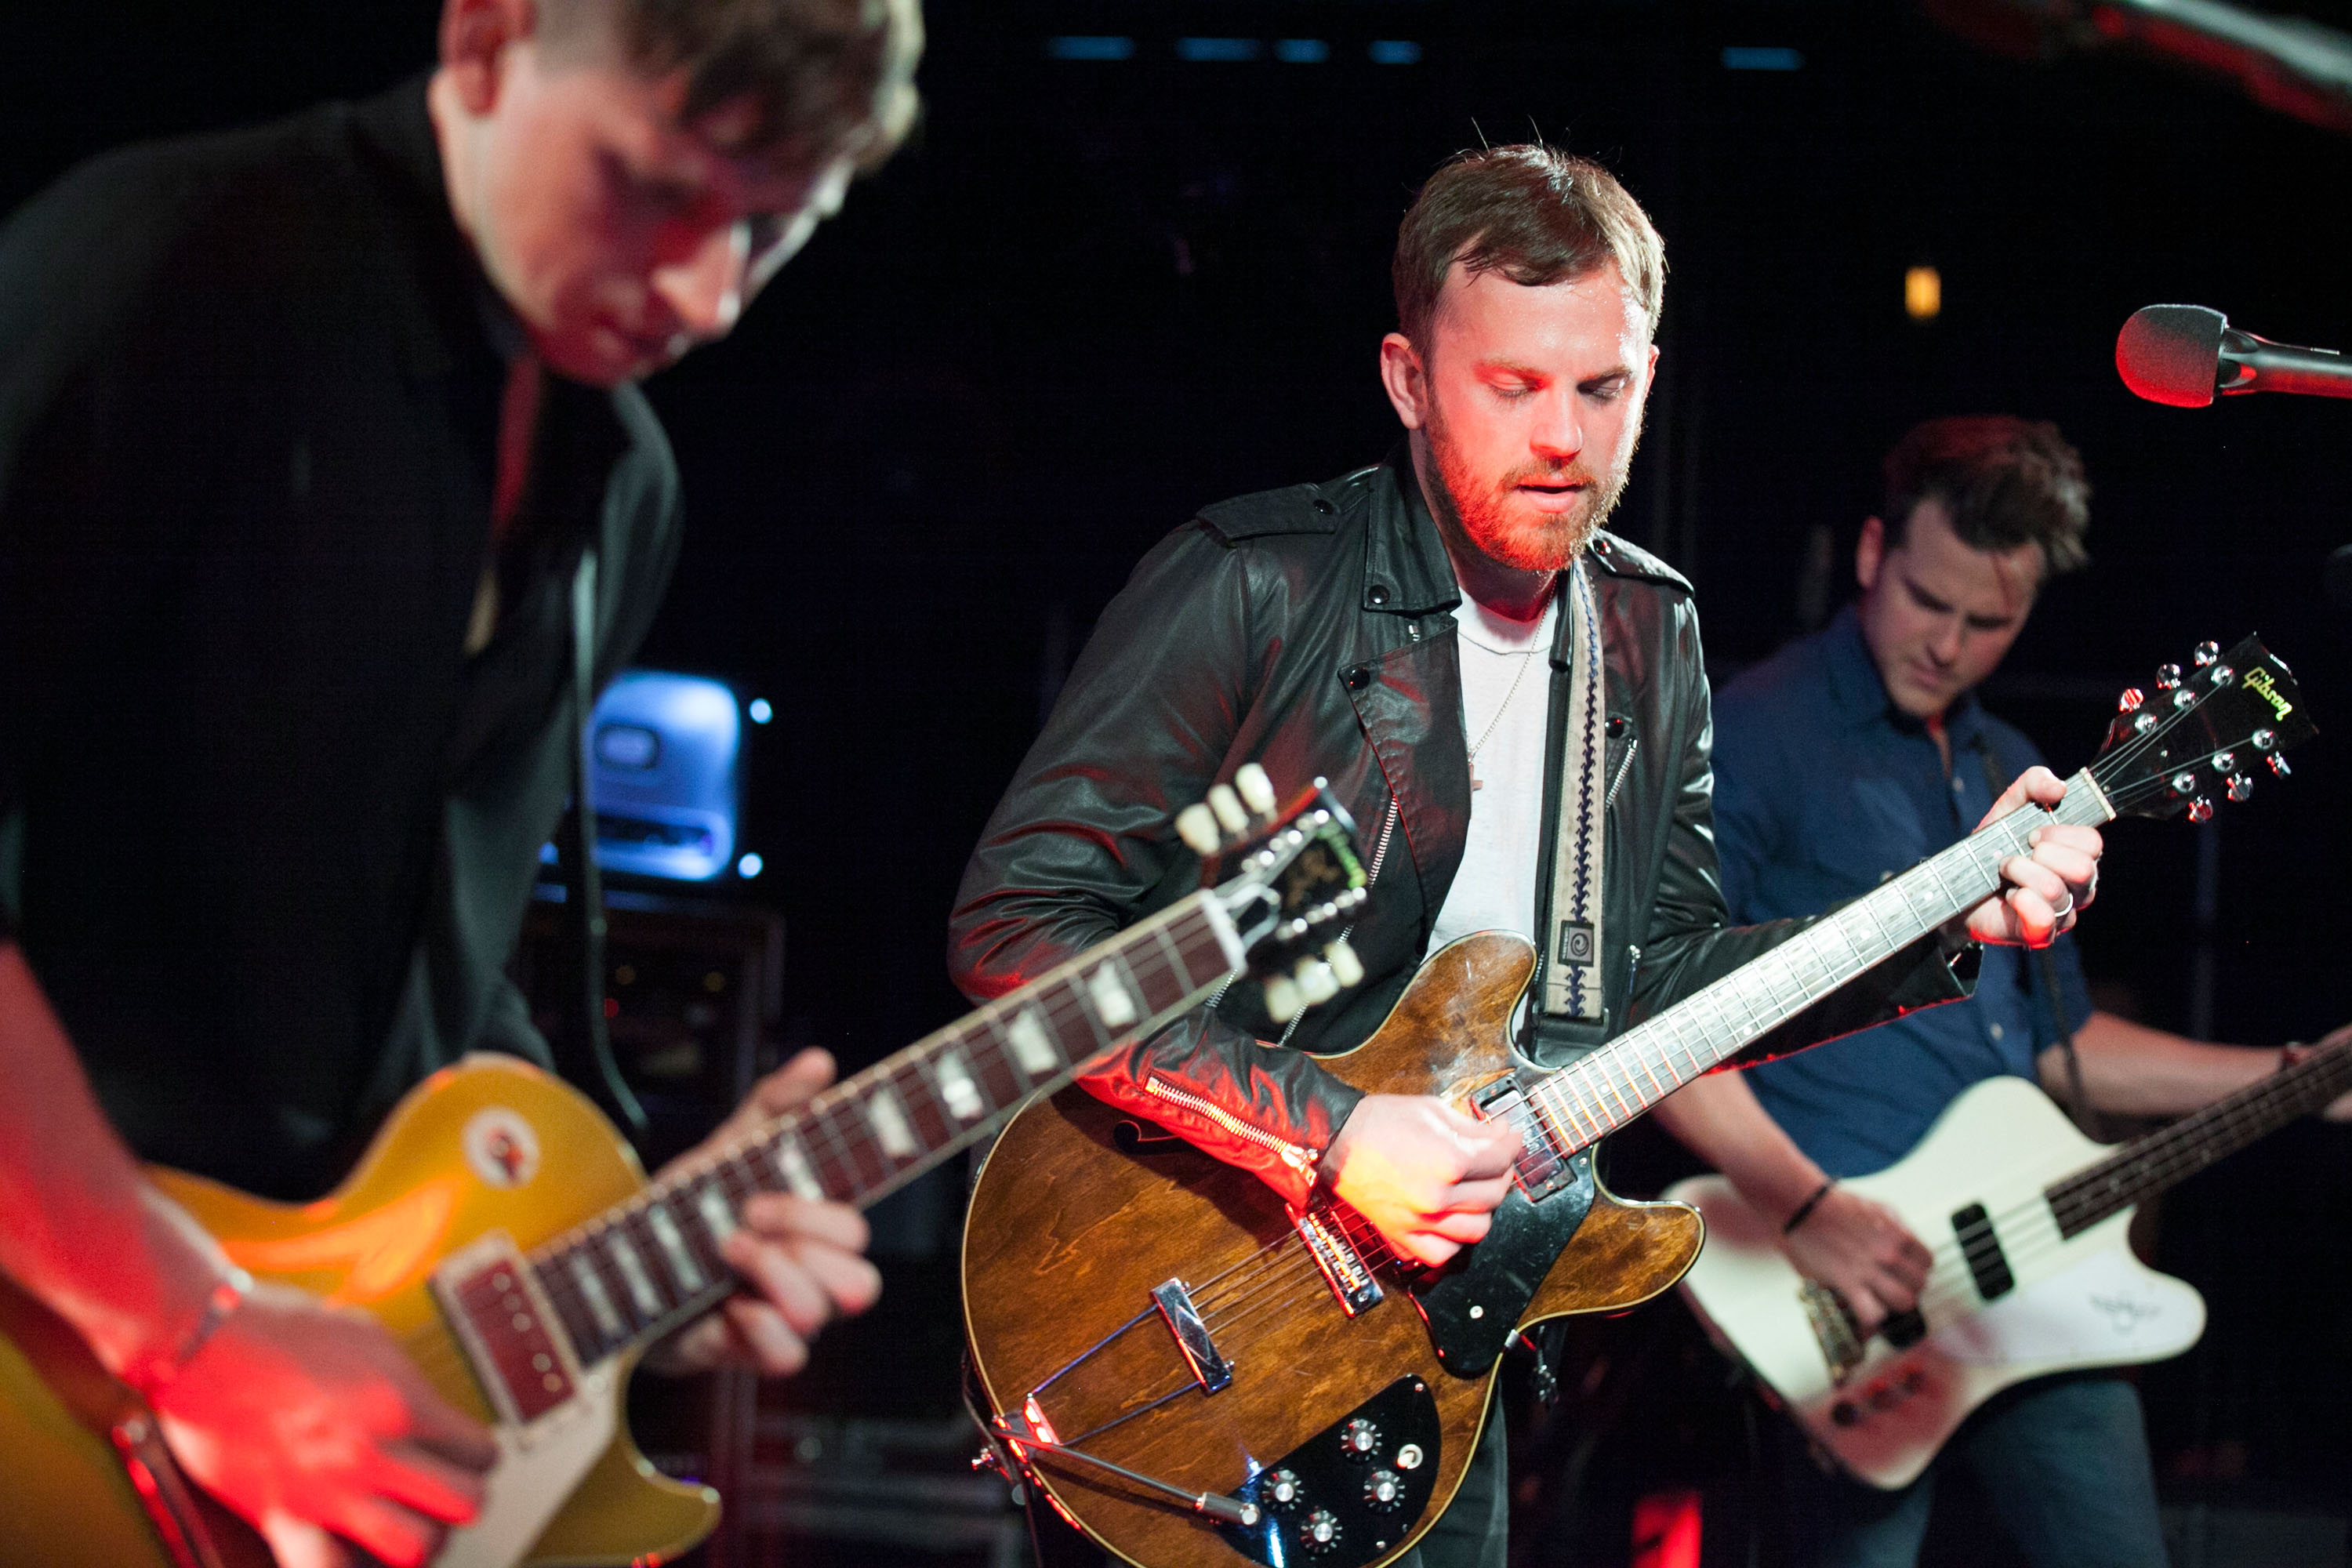 The Kings of Leon Perform At The Red Bull Sound Space At KROQ